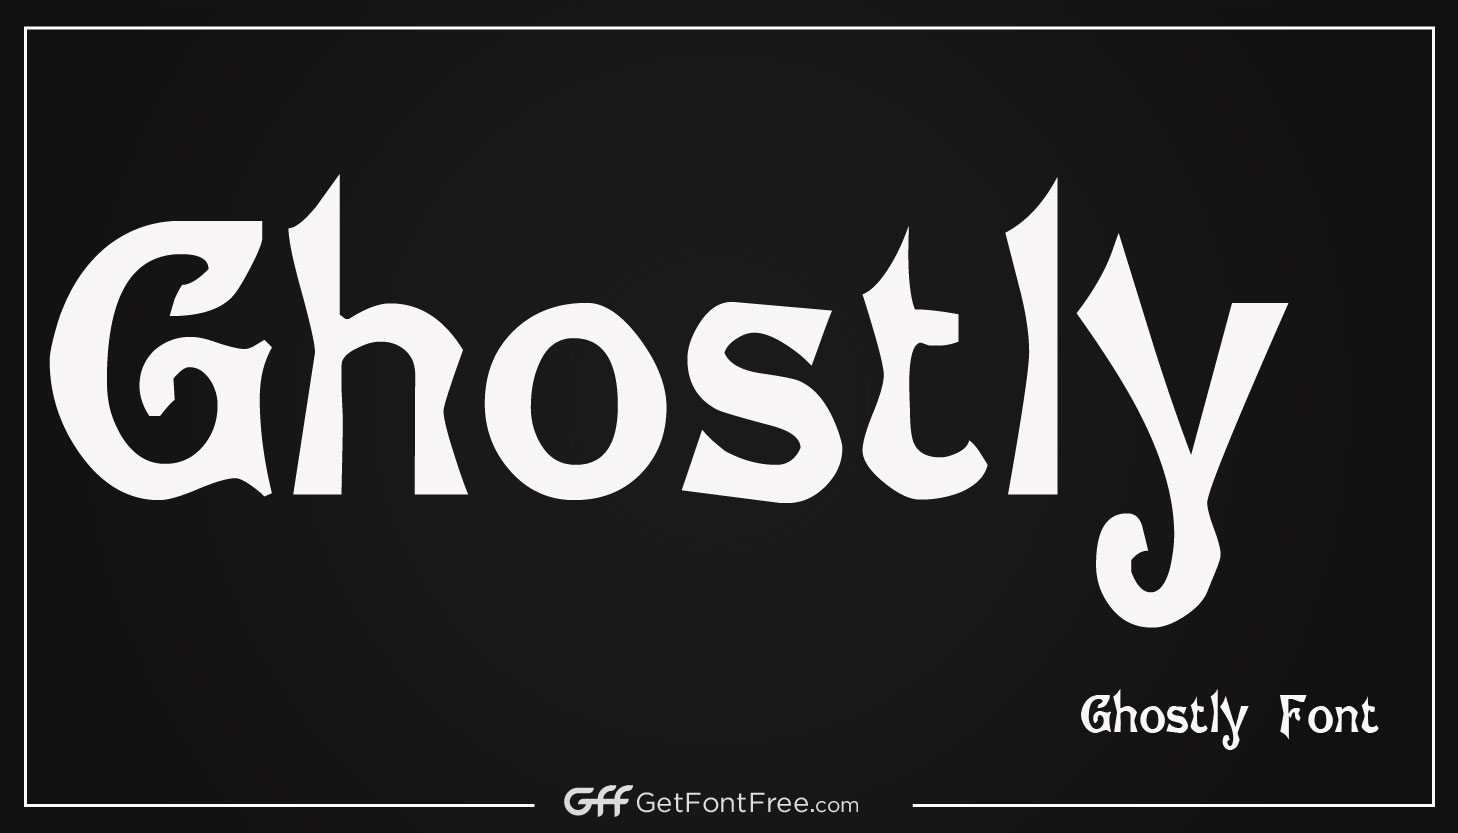 "Ghostly" is a font that was designed by a company called Ghostly International. It is a sans-serif typeface that is characterized by its clean, geometric lines and rounded corners. Ghostly is often used in logos, headlines, and other graphic design applications where a modern, minimalist look is desired. It is a relatively new font, having been released in 2017, and it is available for purchase from Ghostly International and other font vendors.